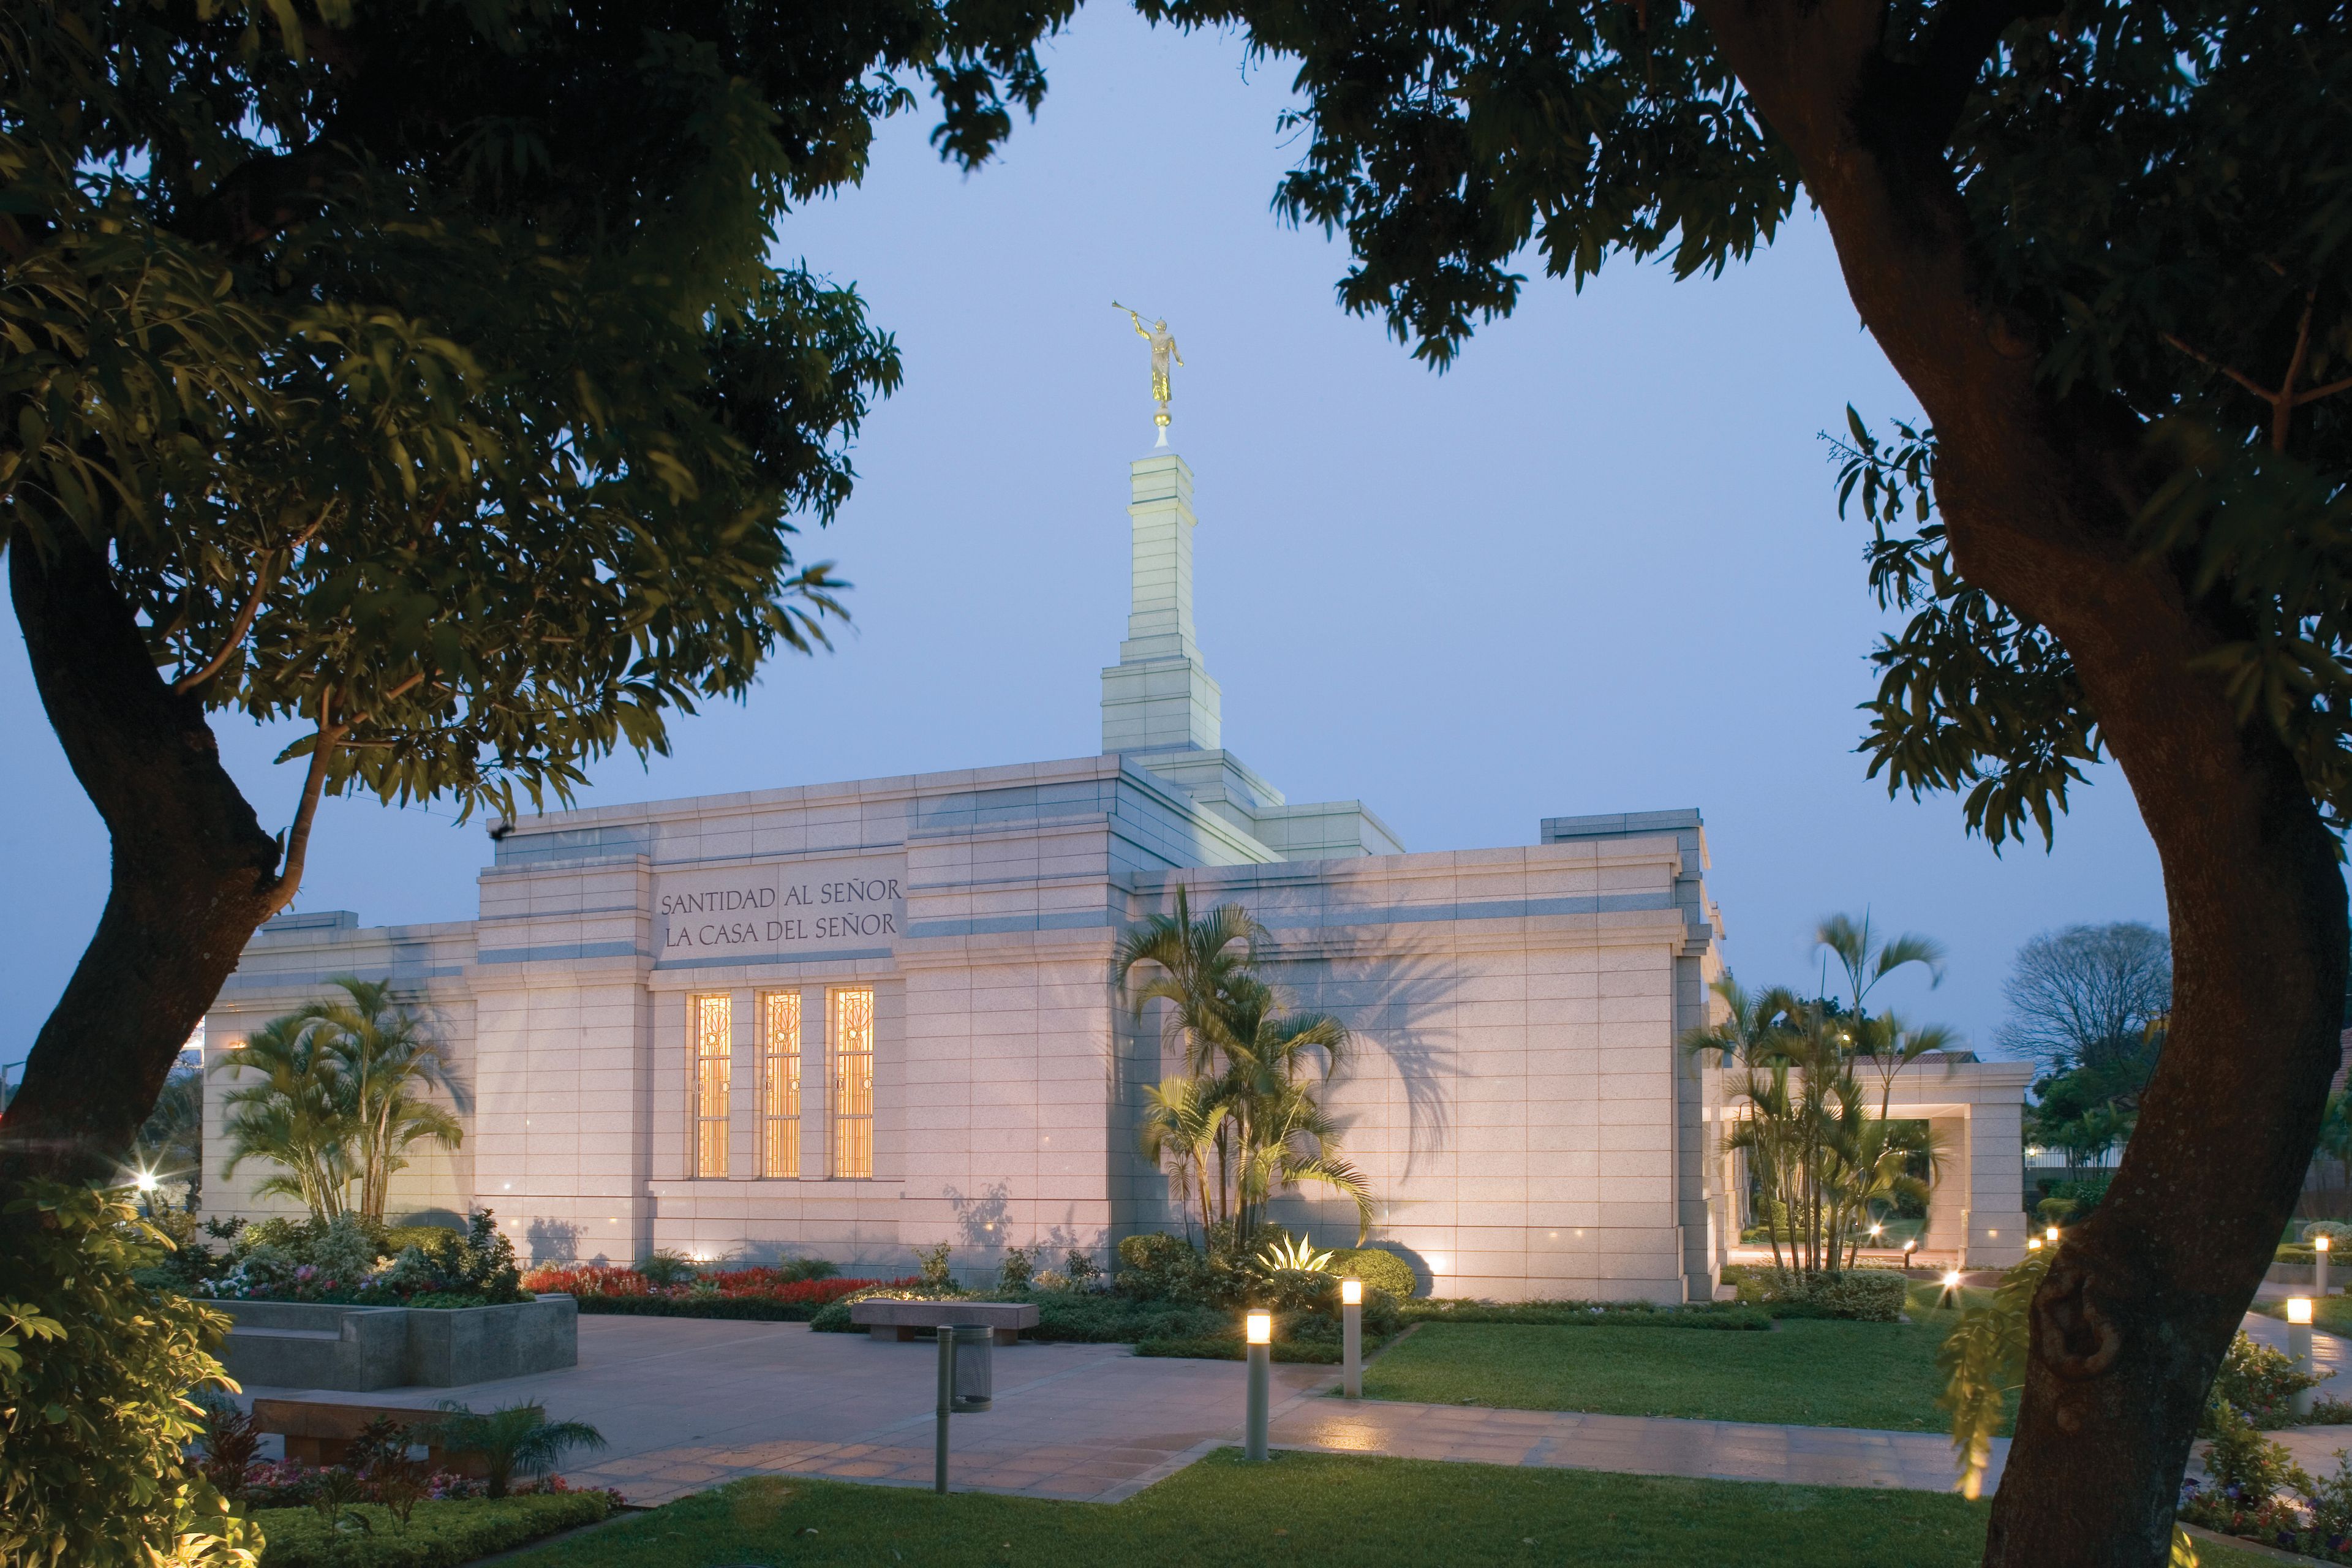 A side view of the exterior of the Asunción Paraguay Temple and grounds at night.